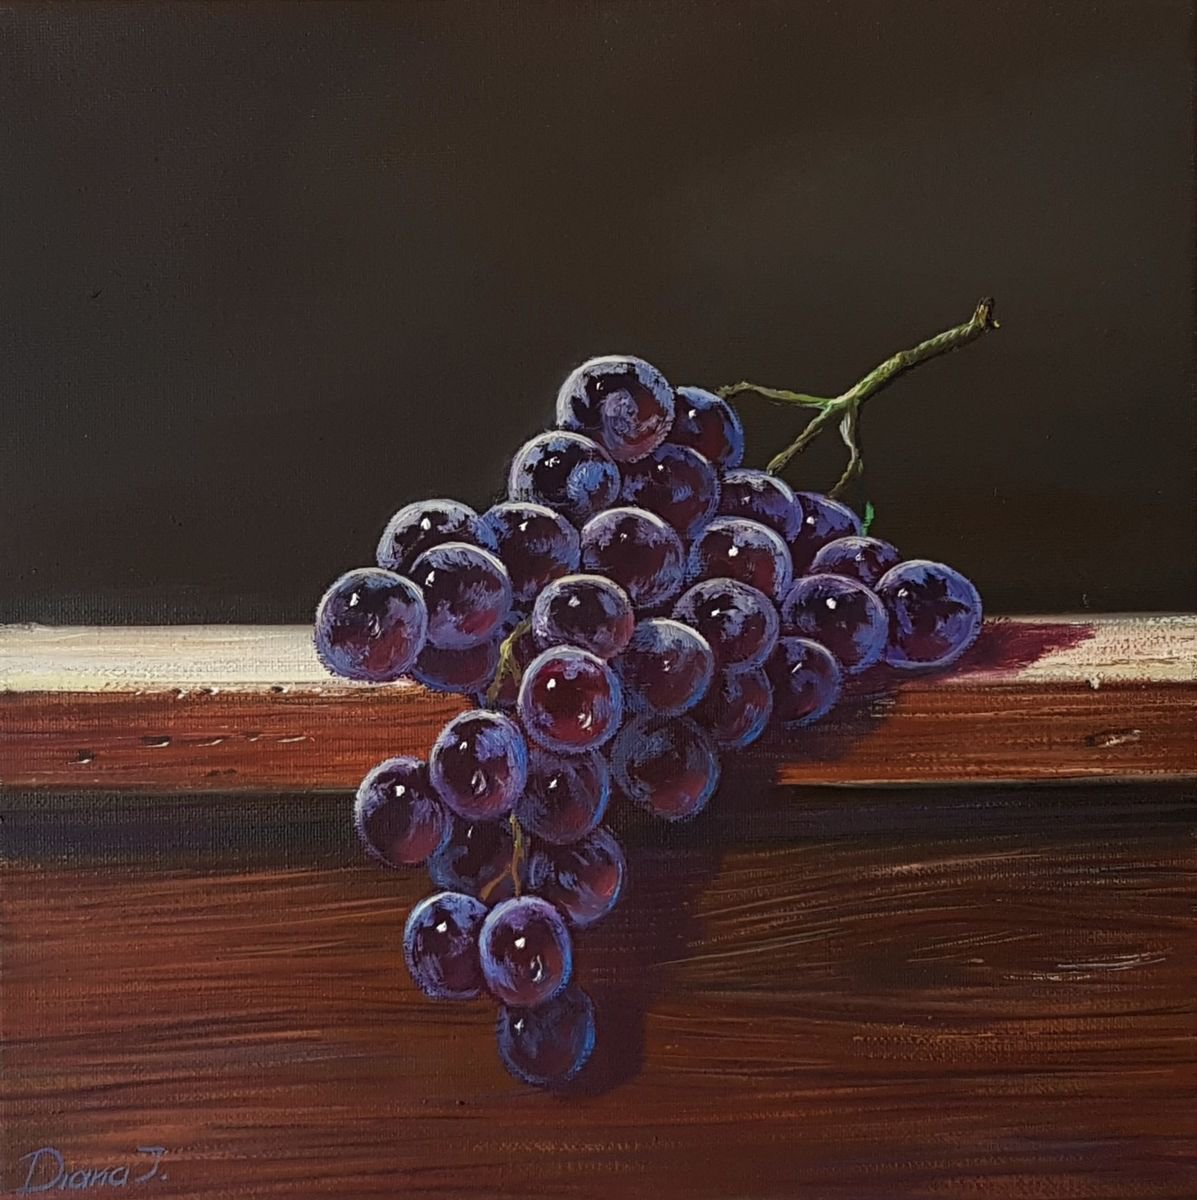 Mystery of the Grapes by Diana Janson